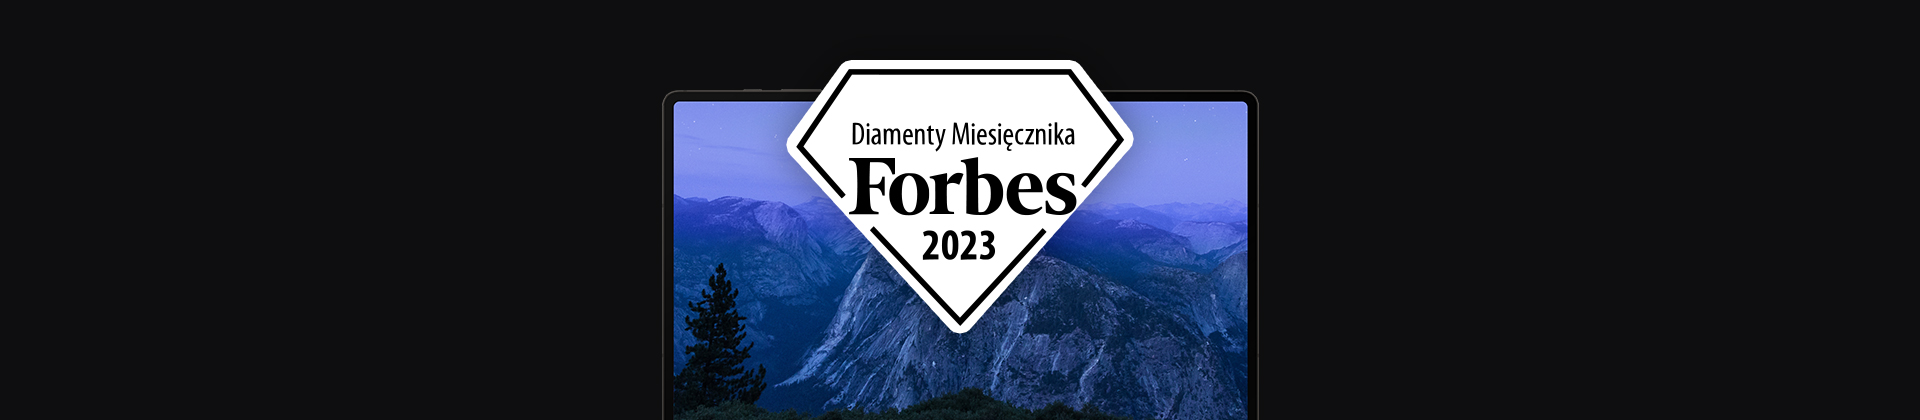 banner with a laptop and the Forbes Diamonds 2023 logo